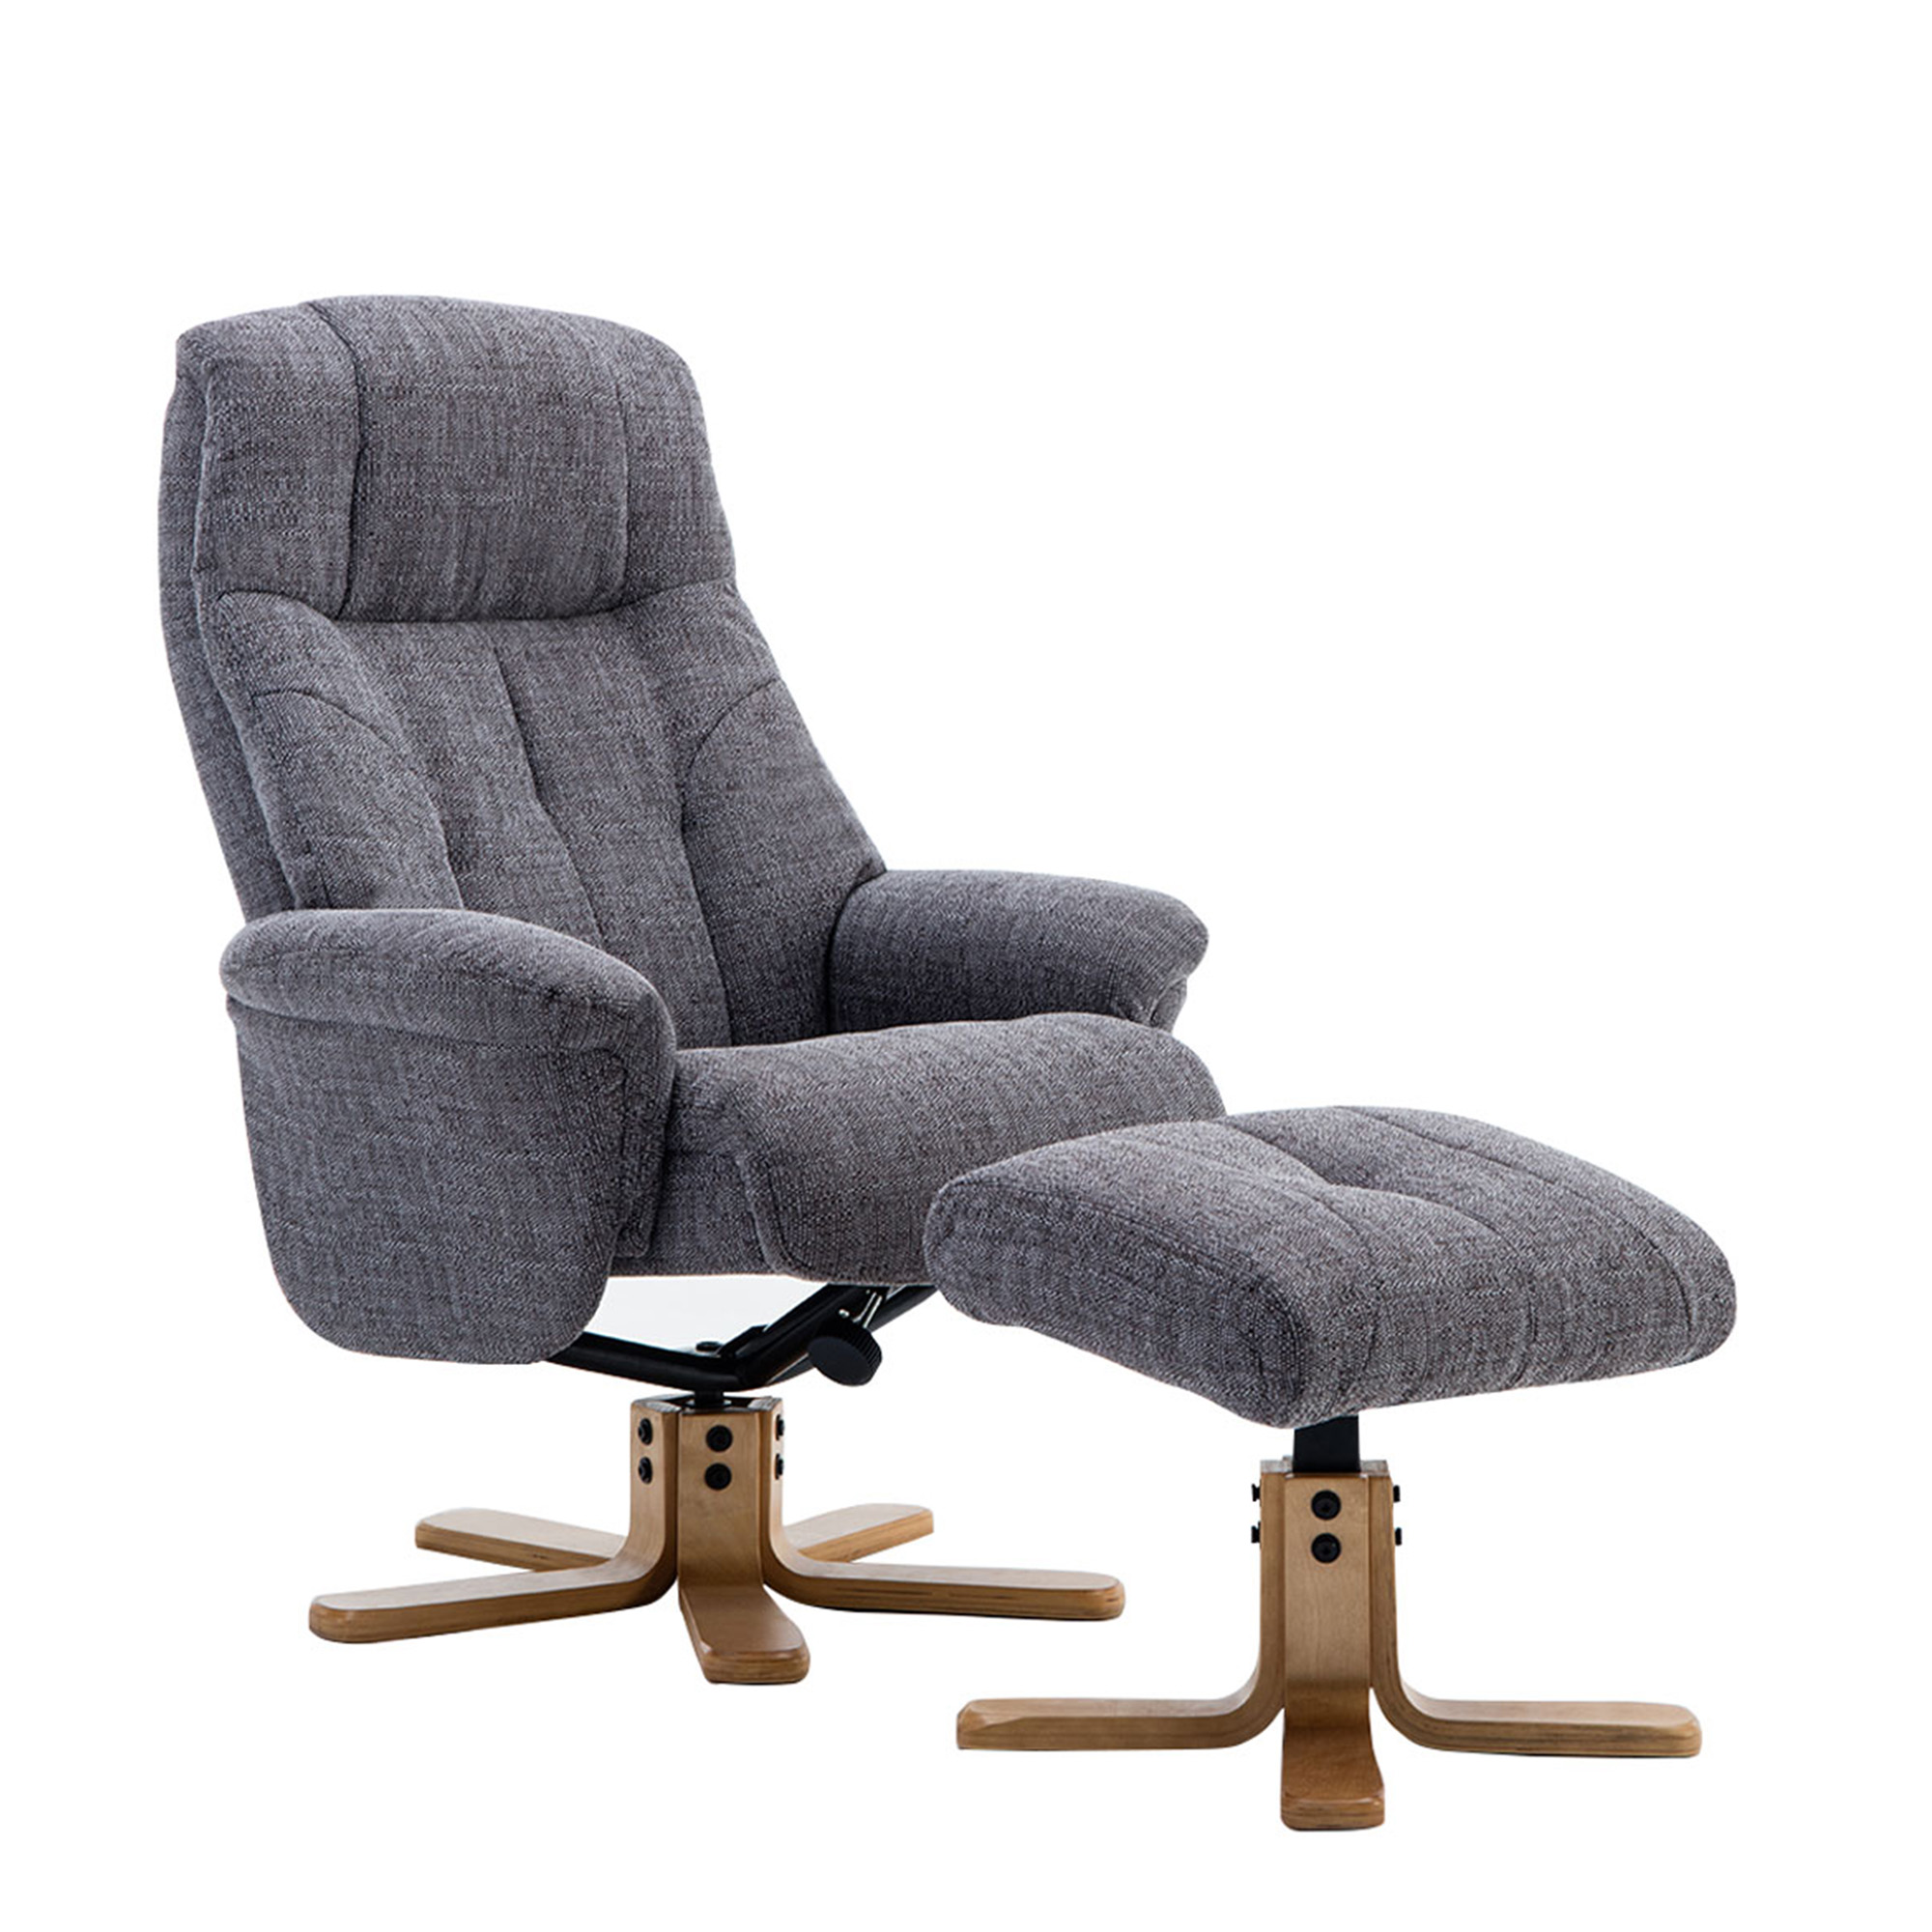 Quebec Swivel Chair And Stool In Lisbon Grey Fabric Recliner Chairs Fishpools